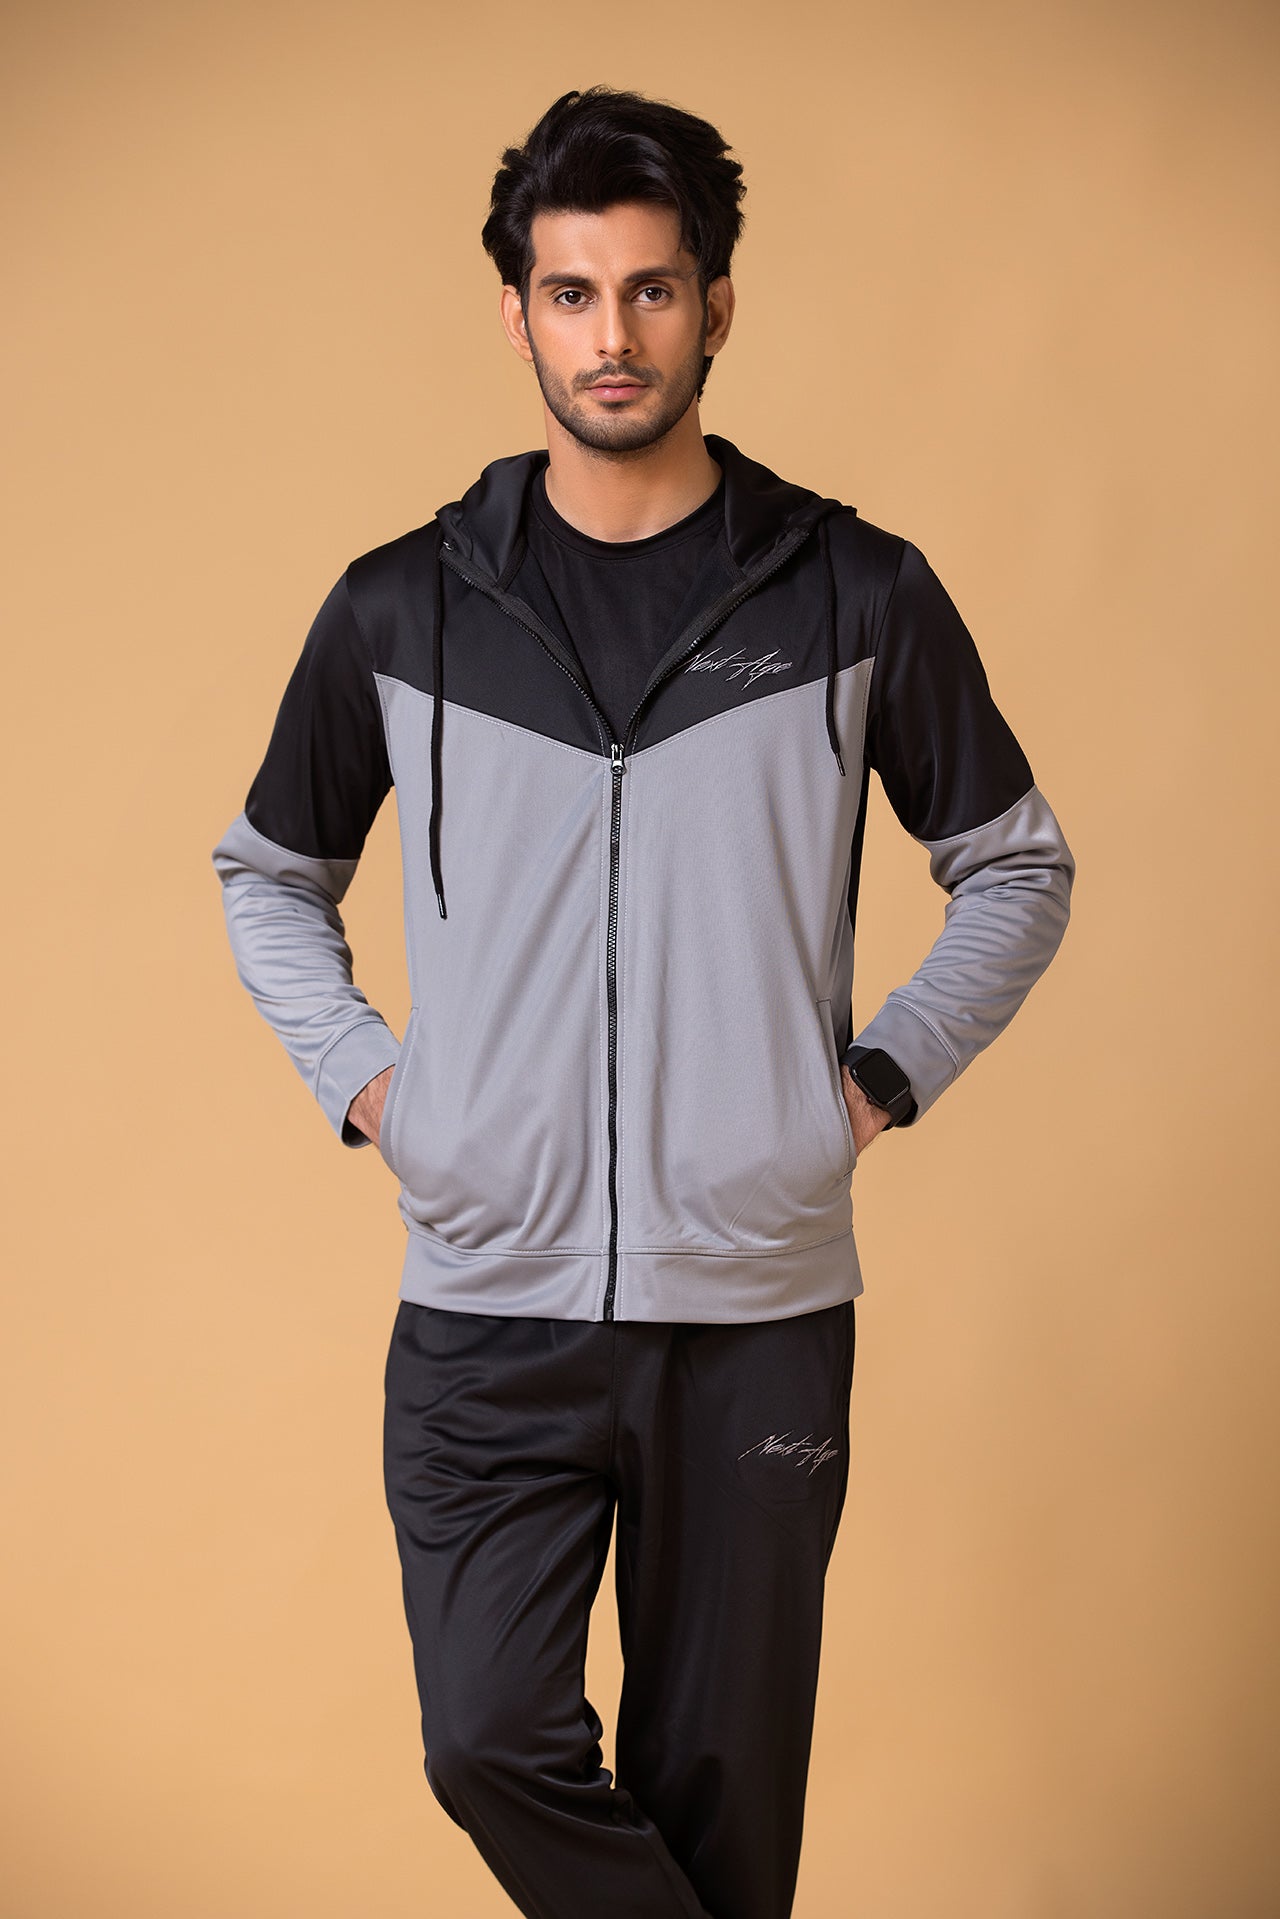 Mens Winter Tracksuit Set Long Sleeve Casual Jogger Pants And Sweatshirt  Mens Plus Size Sportswear Jacket And Tracksward Coat Perfect For Christmas  From Hua999, $36.55 | DHgate.Com